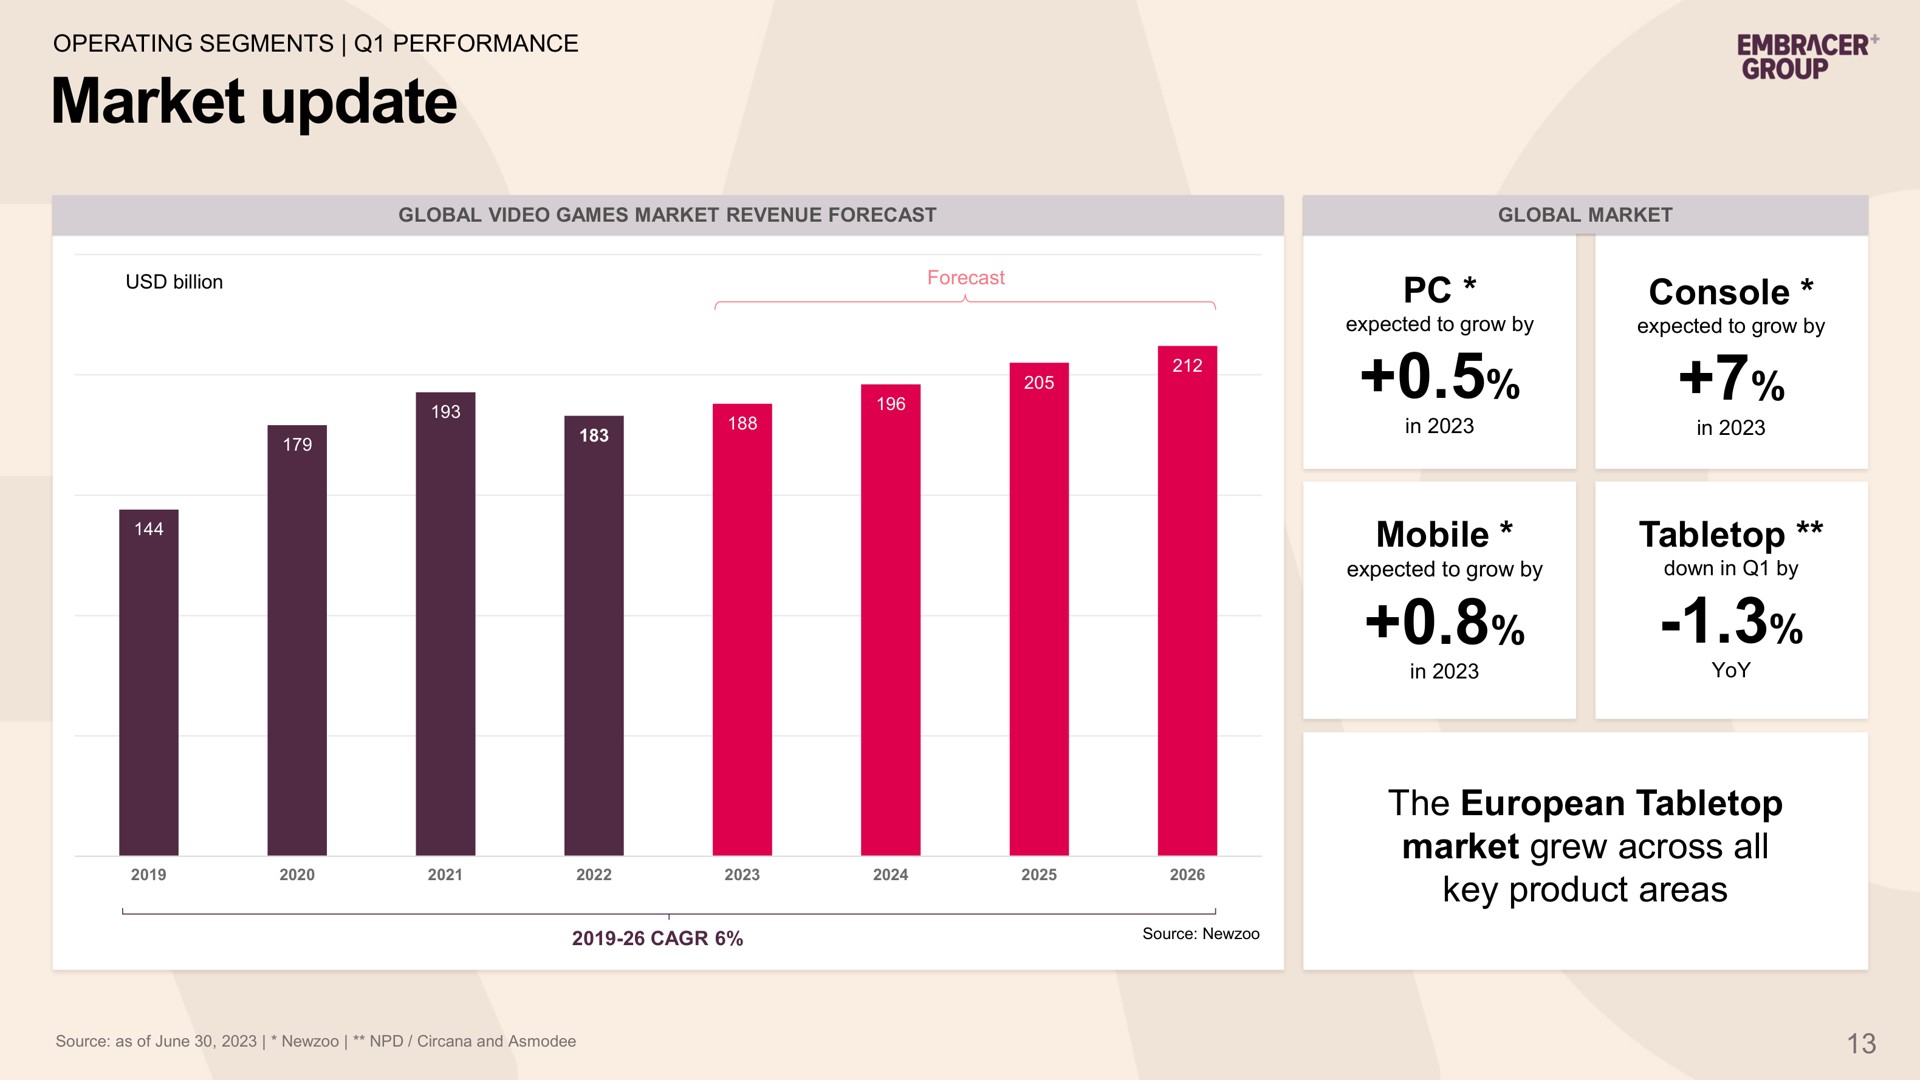 market update console mobile the market grew across all key product areas | Embracer Group